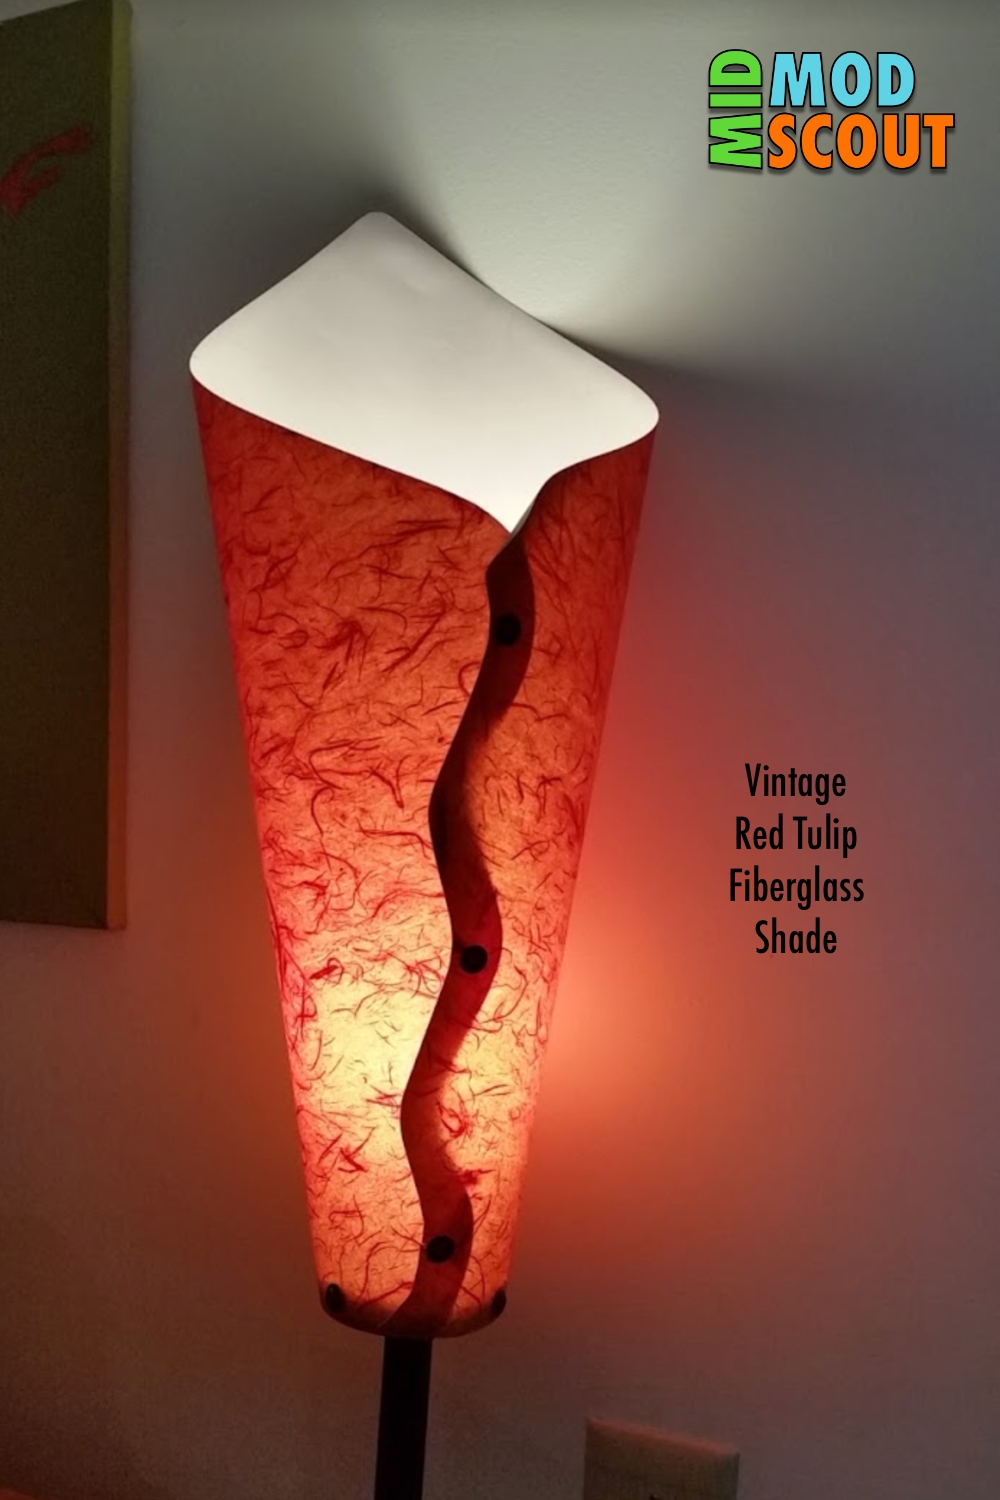 Buying Mid Century Modern lamps - Shown is my vintage red tulip fiberglass shade lamp.